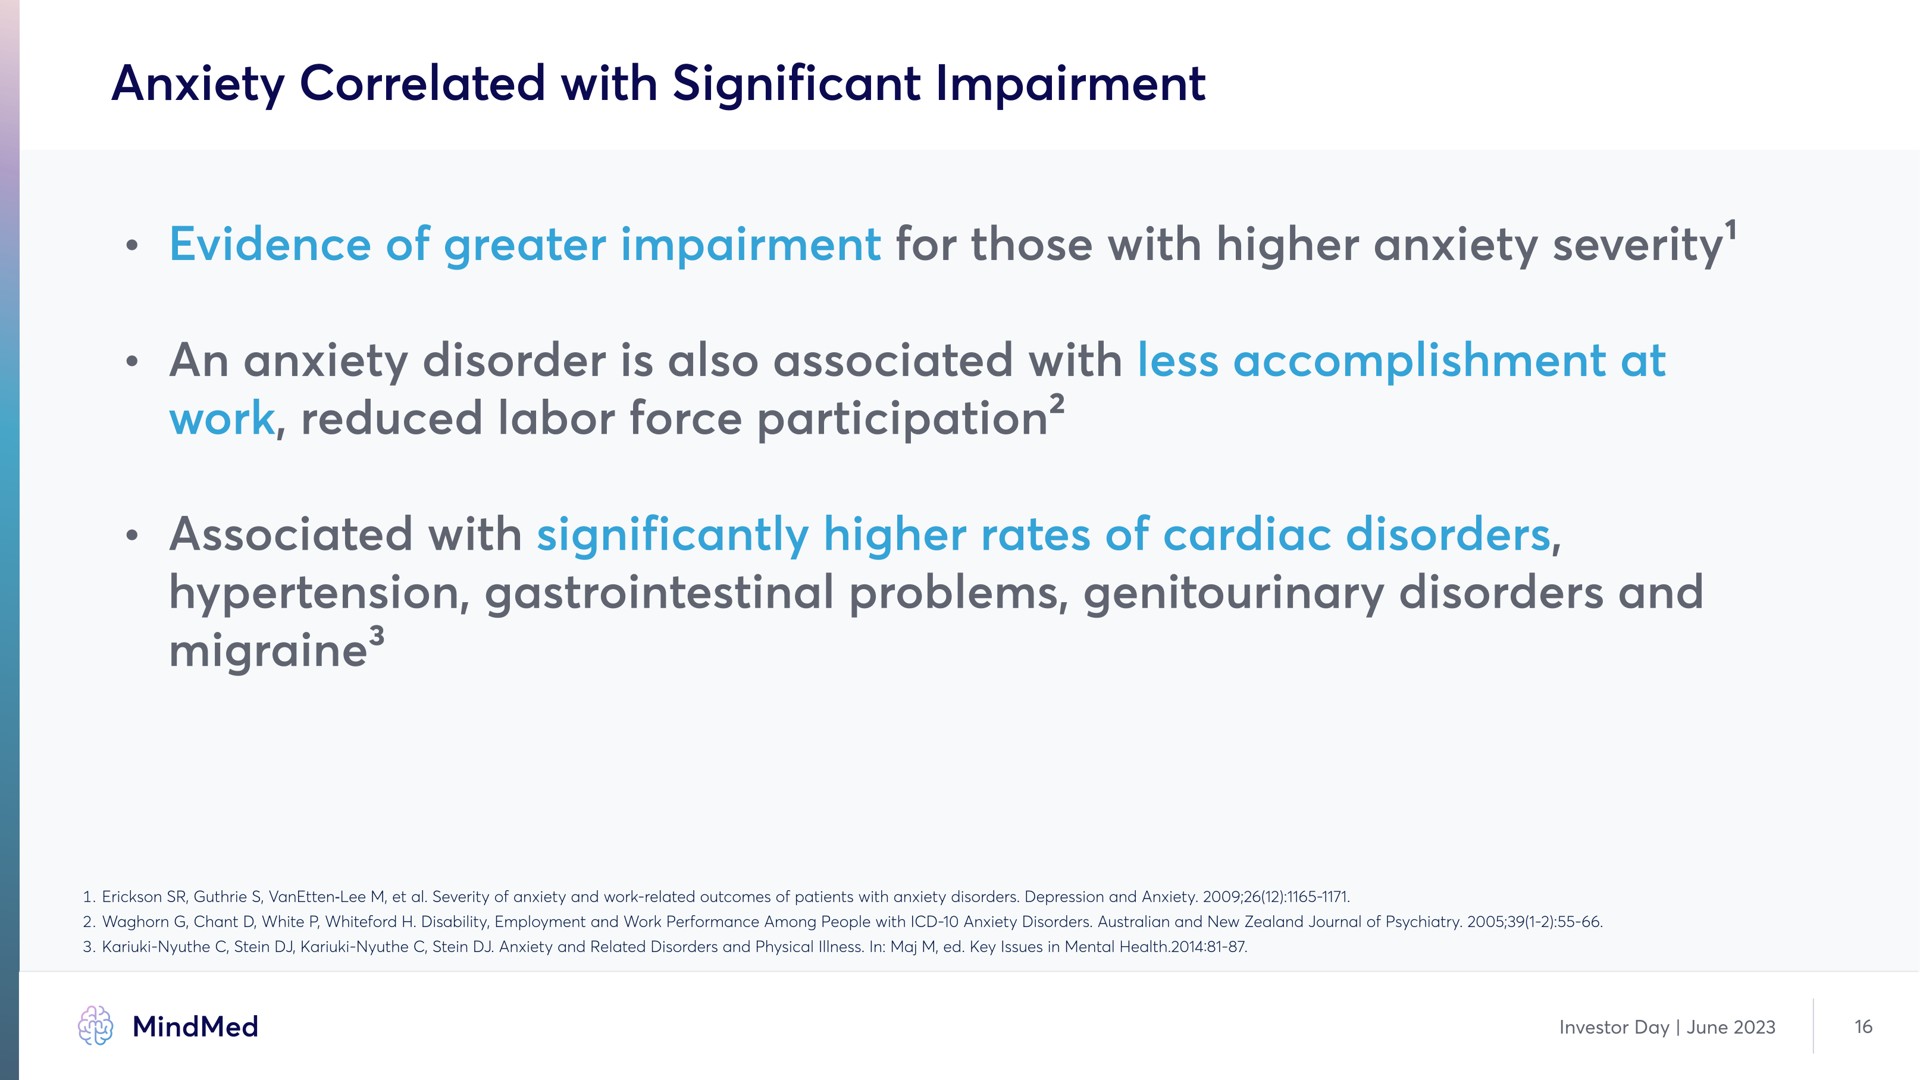 anxiety correlated with significant impairment evidence of greater impairment for those with higher anxiety severity an anxiety disorder is also associated with less accomplishment at work reduced labor force participation associated with significantly higher rates of cardiac disorders hypertension gastrointestinal problems genitourinary disorders and migraine migraine | MindMed